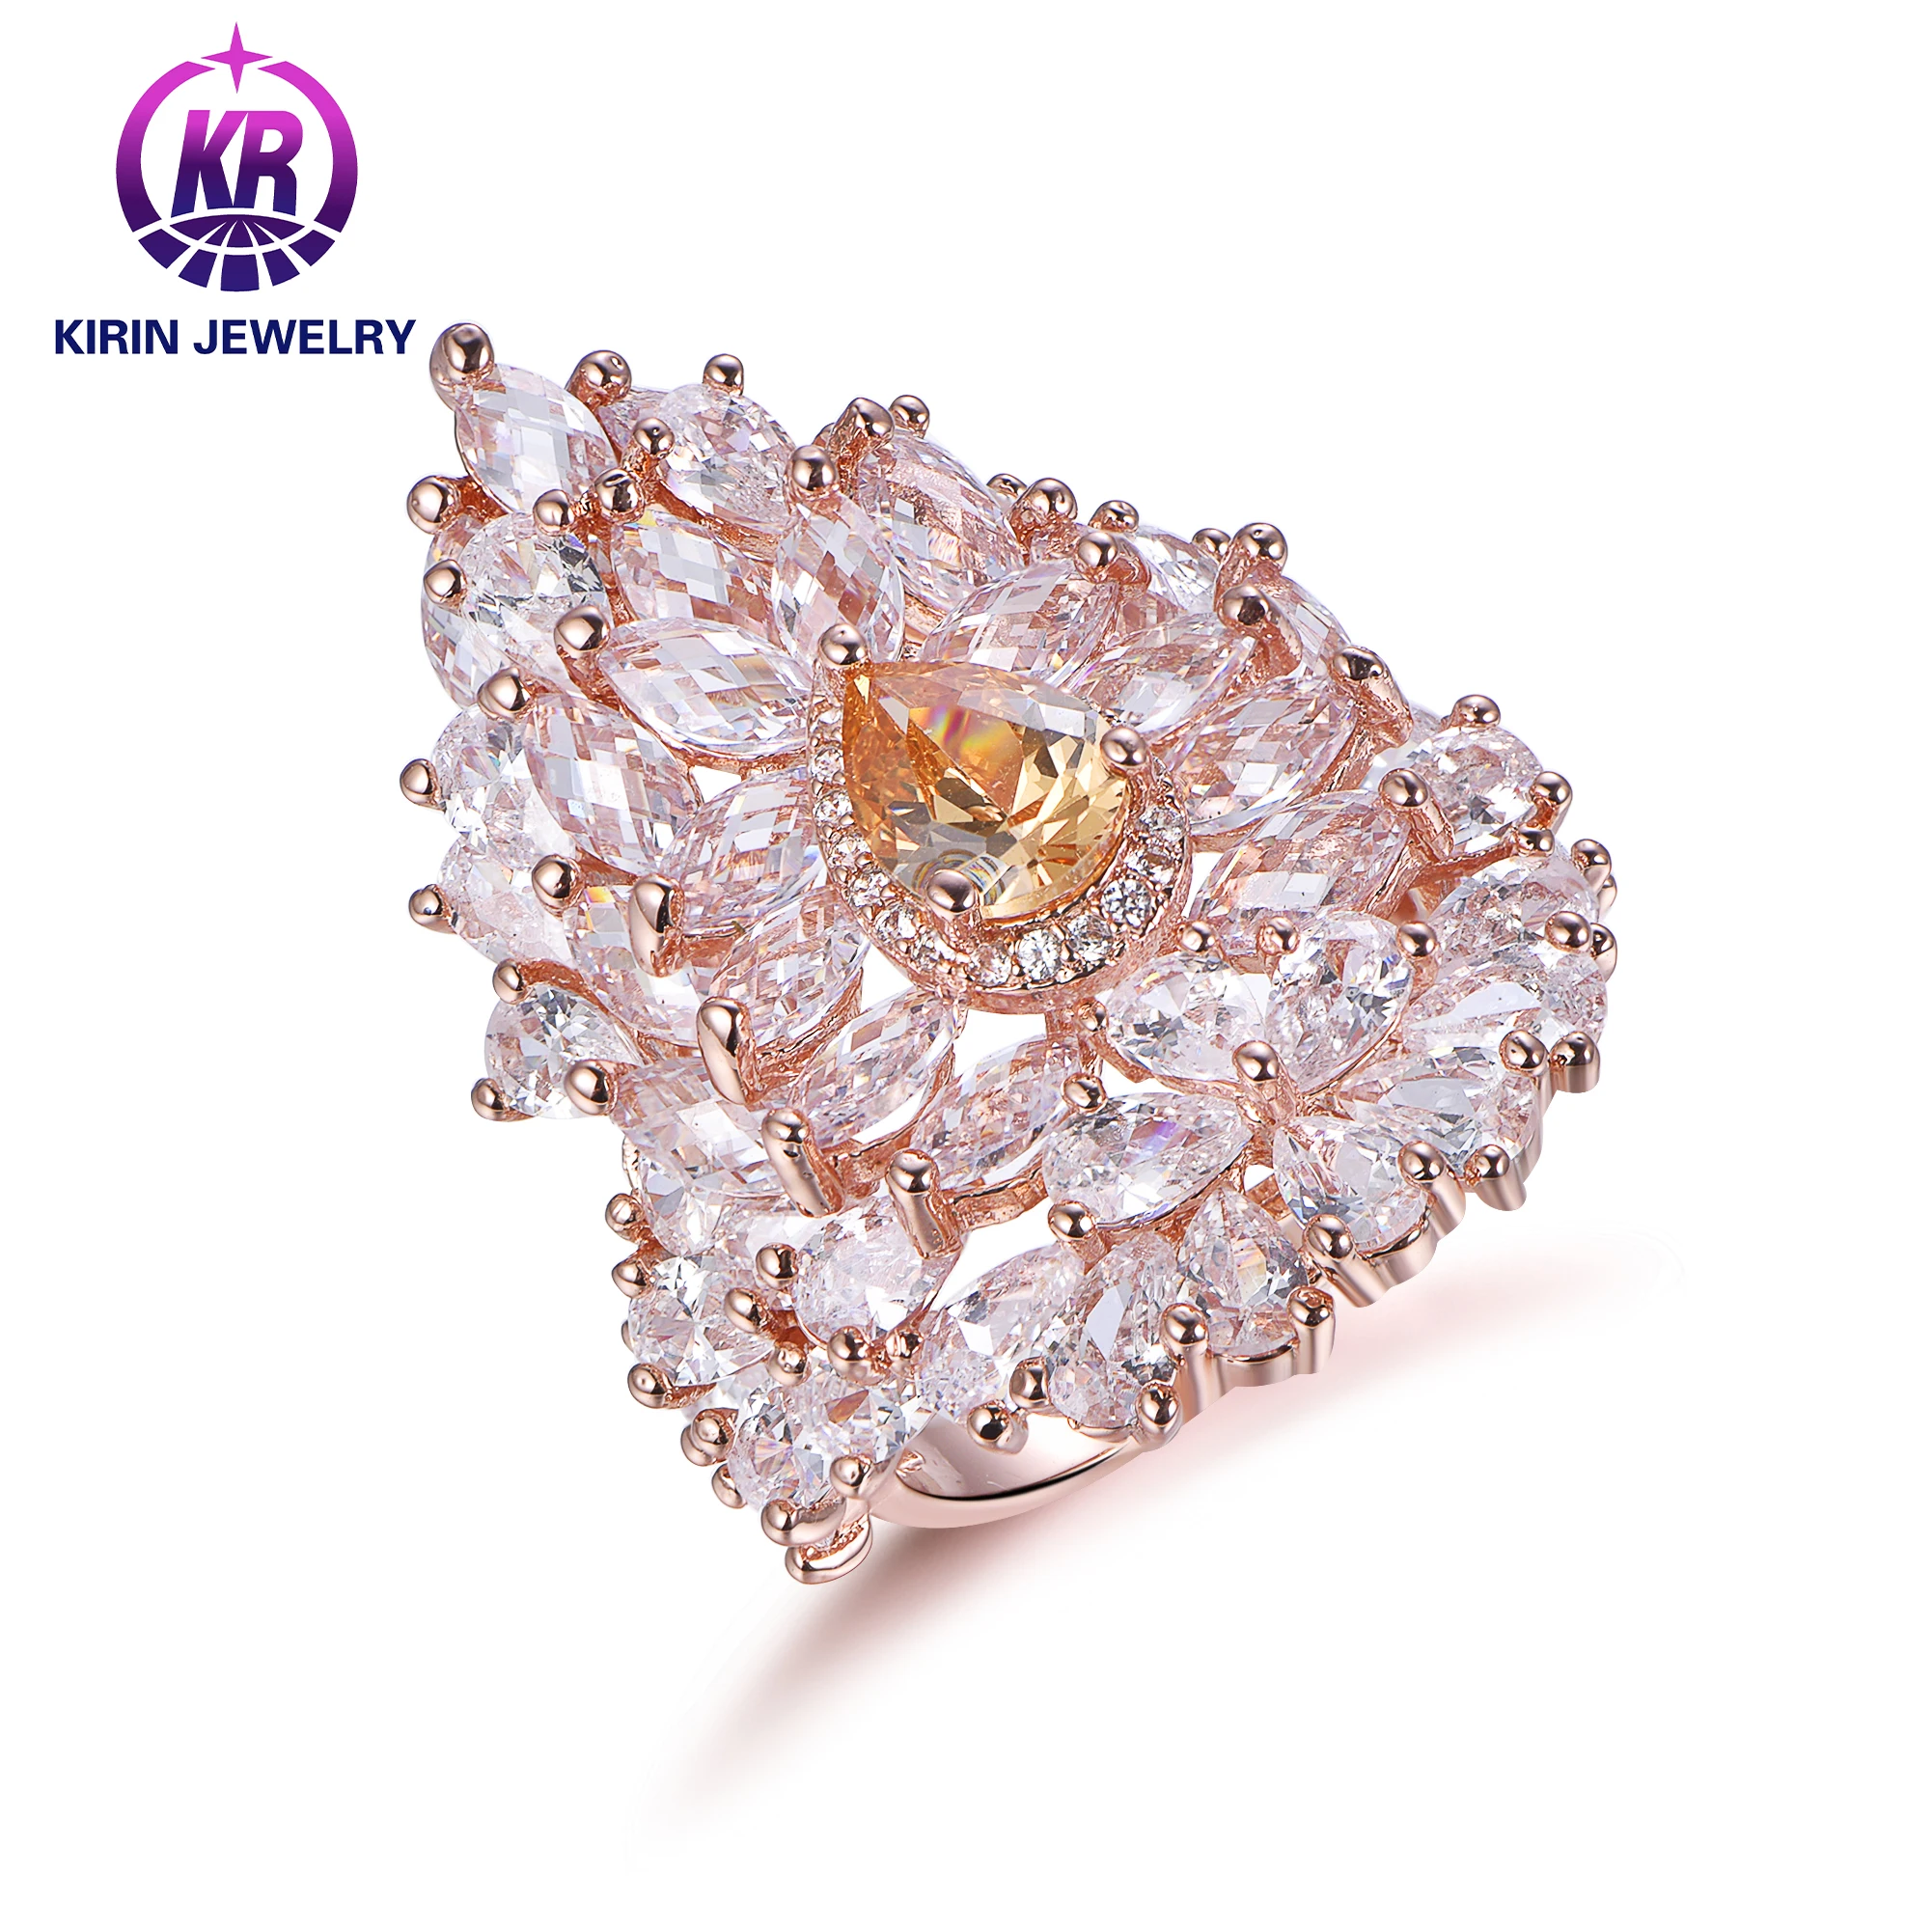 Jewelry Engagement Ring Women's Vintage Rose Gold Diamond Ring Couple Wedding Ring 925 Sterling Silver